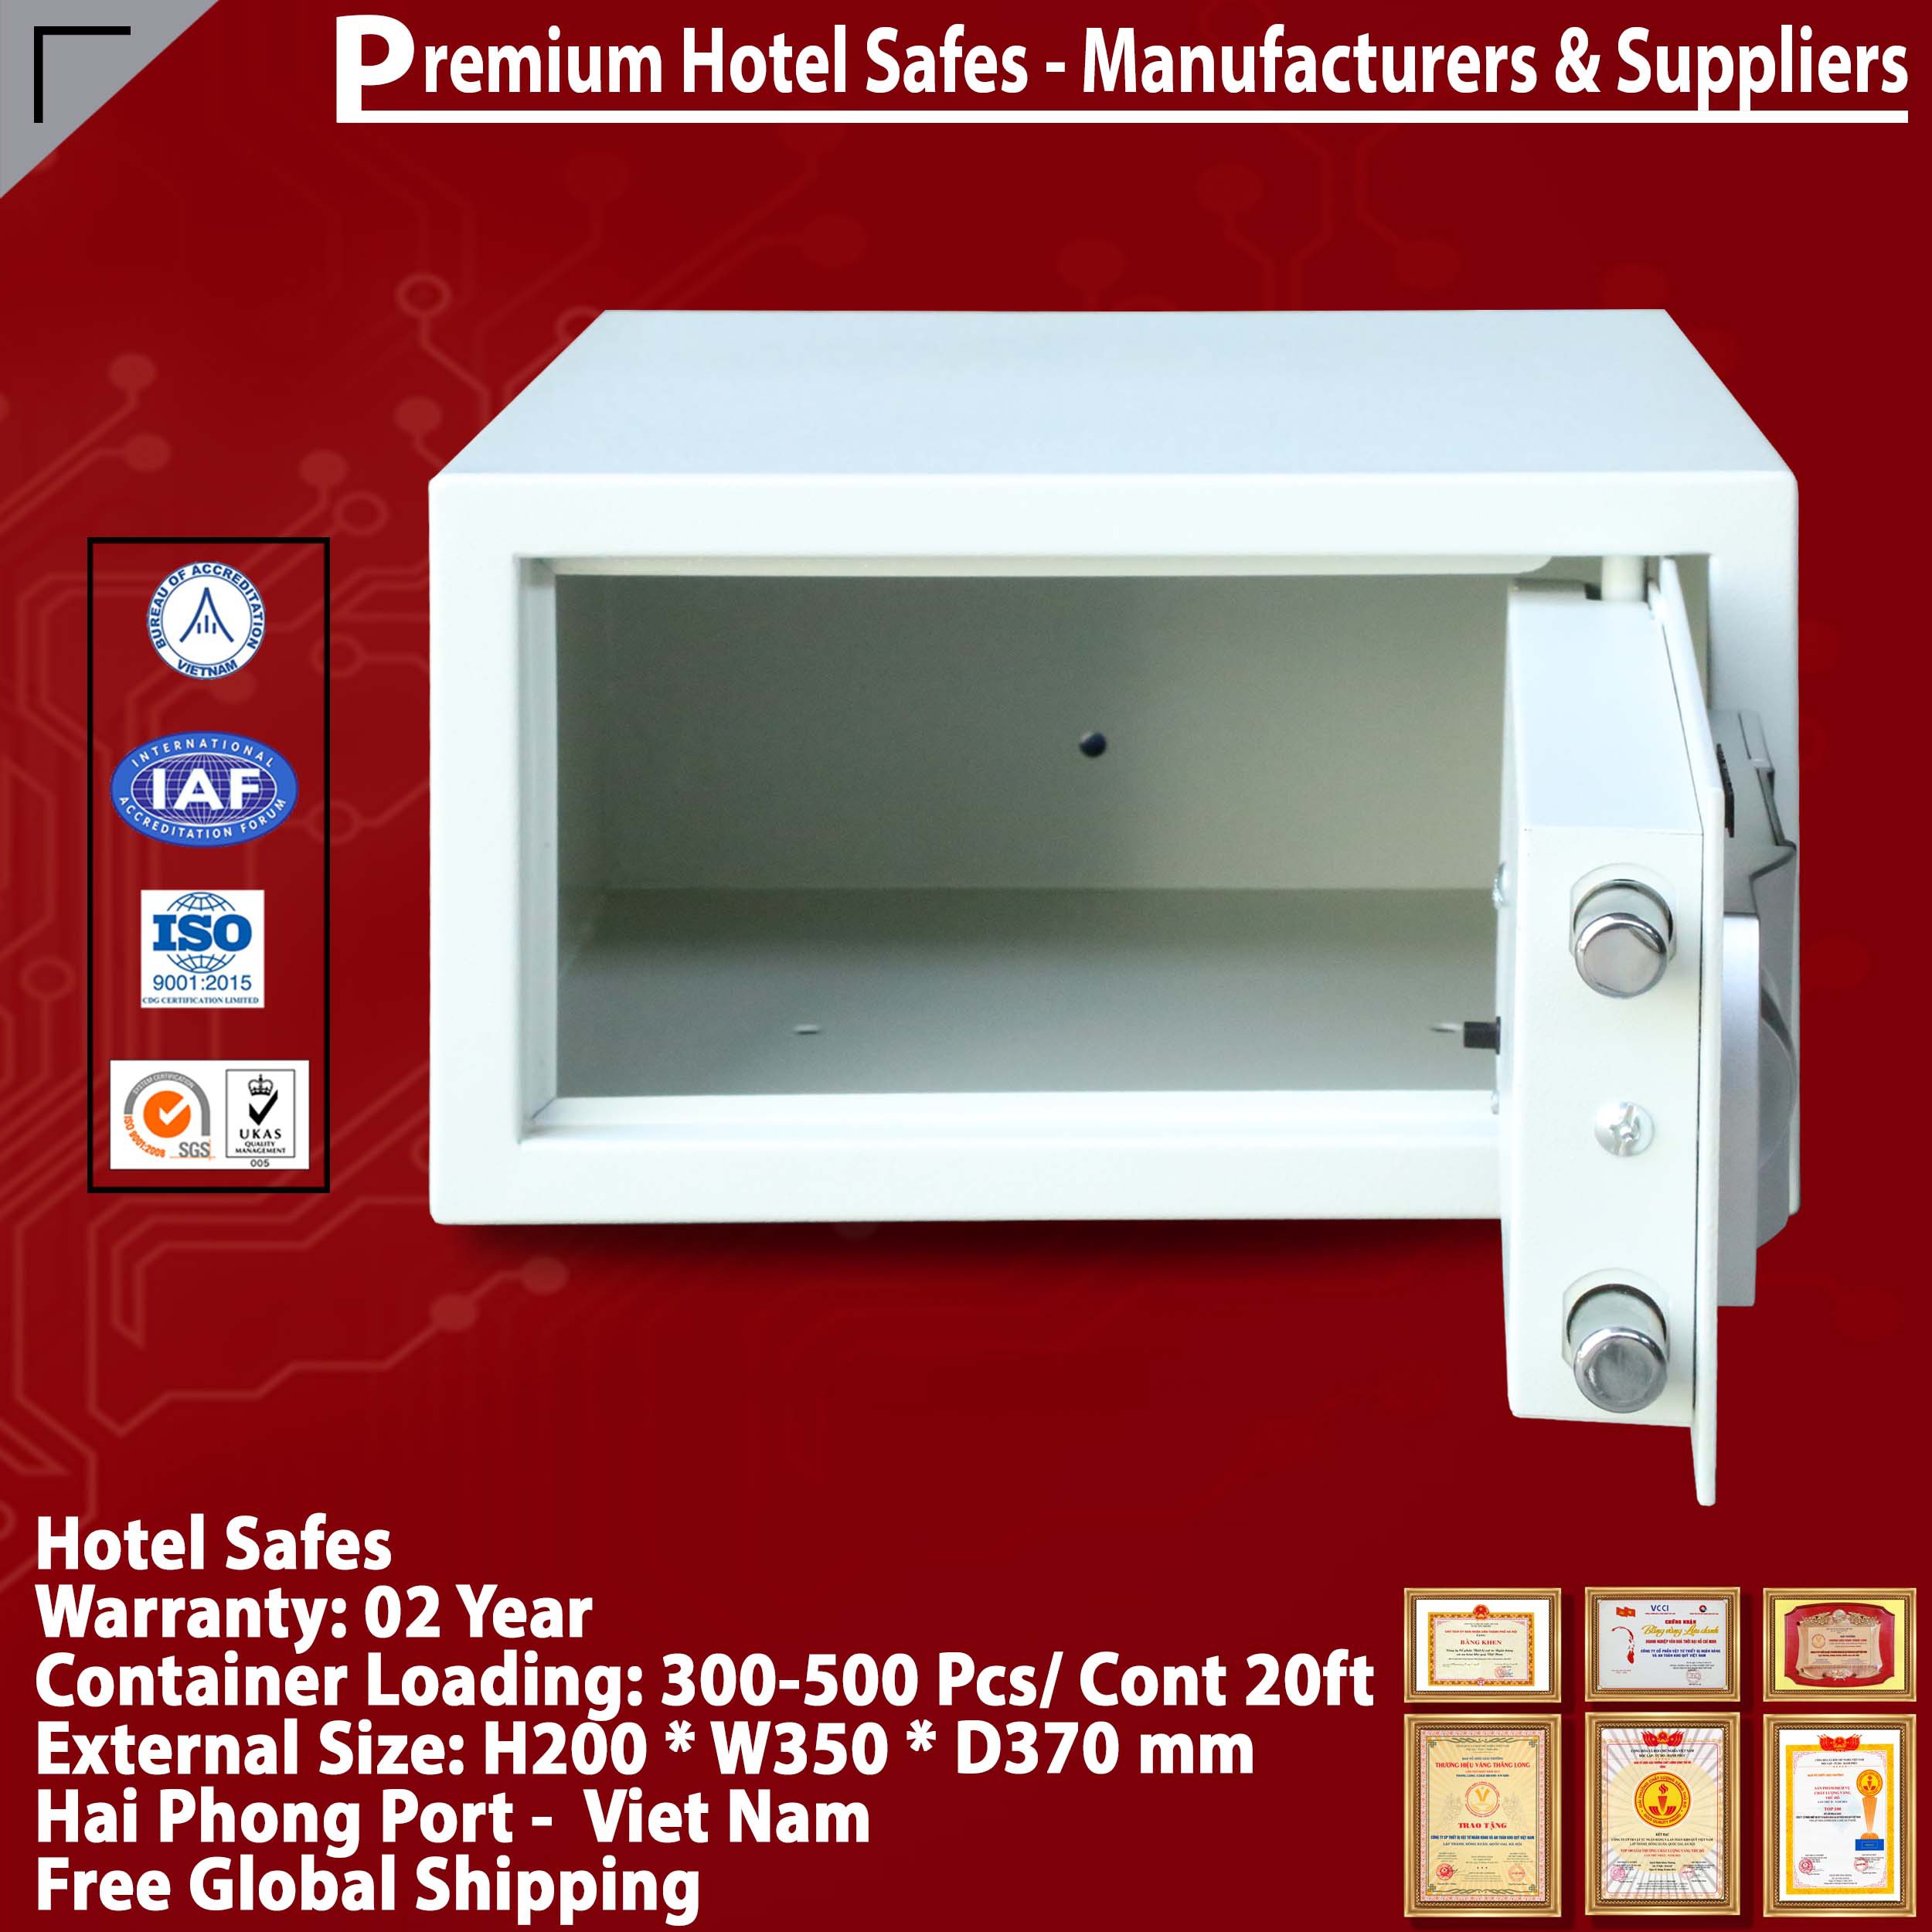 Best Sellers In Hotel Safes Made In Viet Nam - Factory Direct/Excellent Price